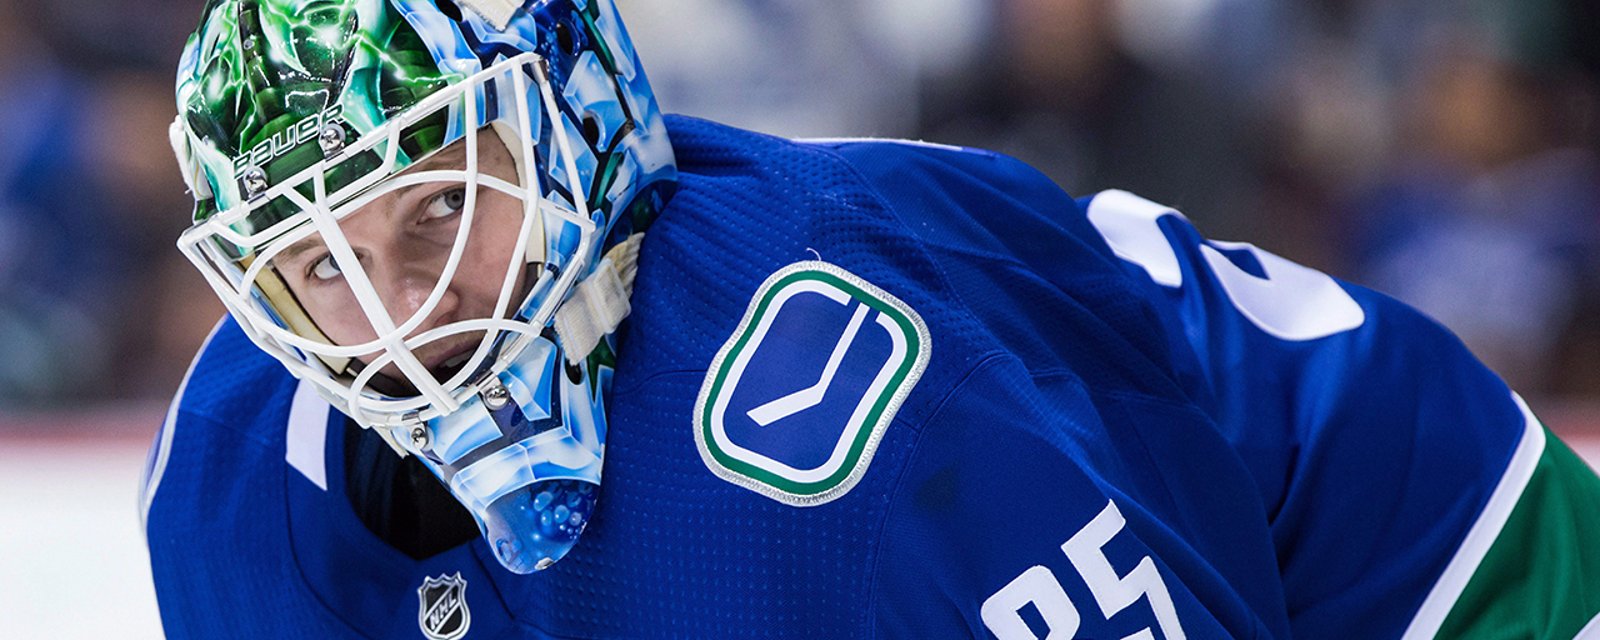 Concern for Thatcher Demko after he leaves game early.